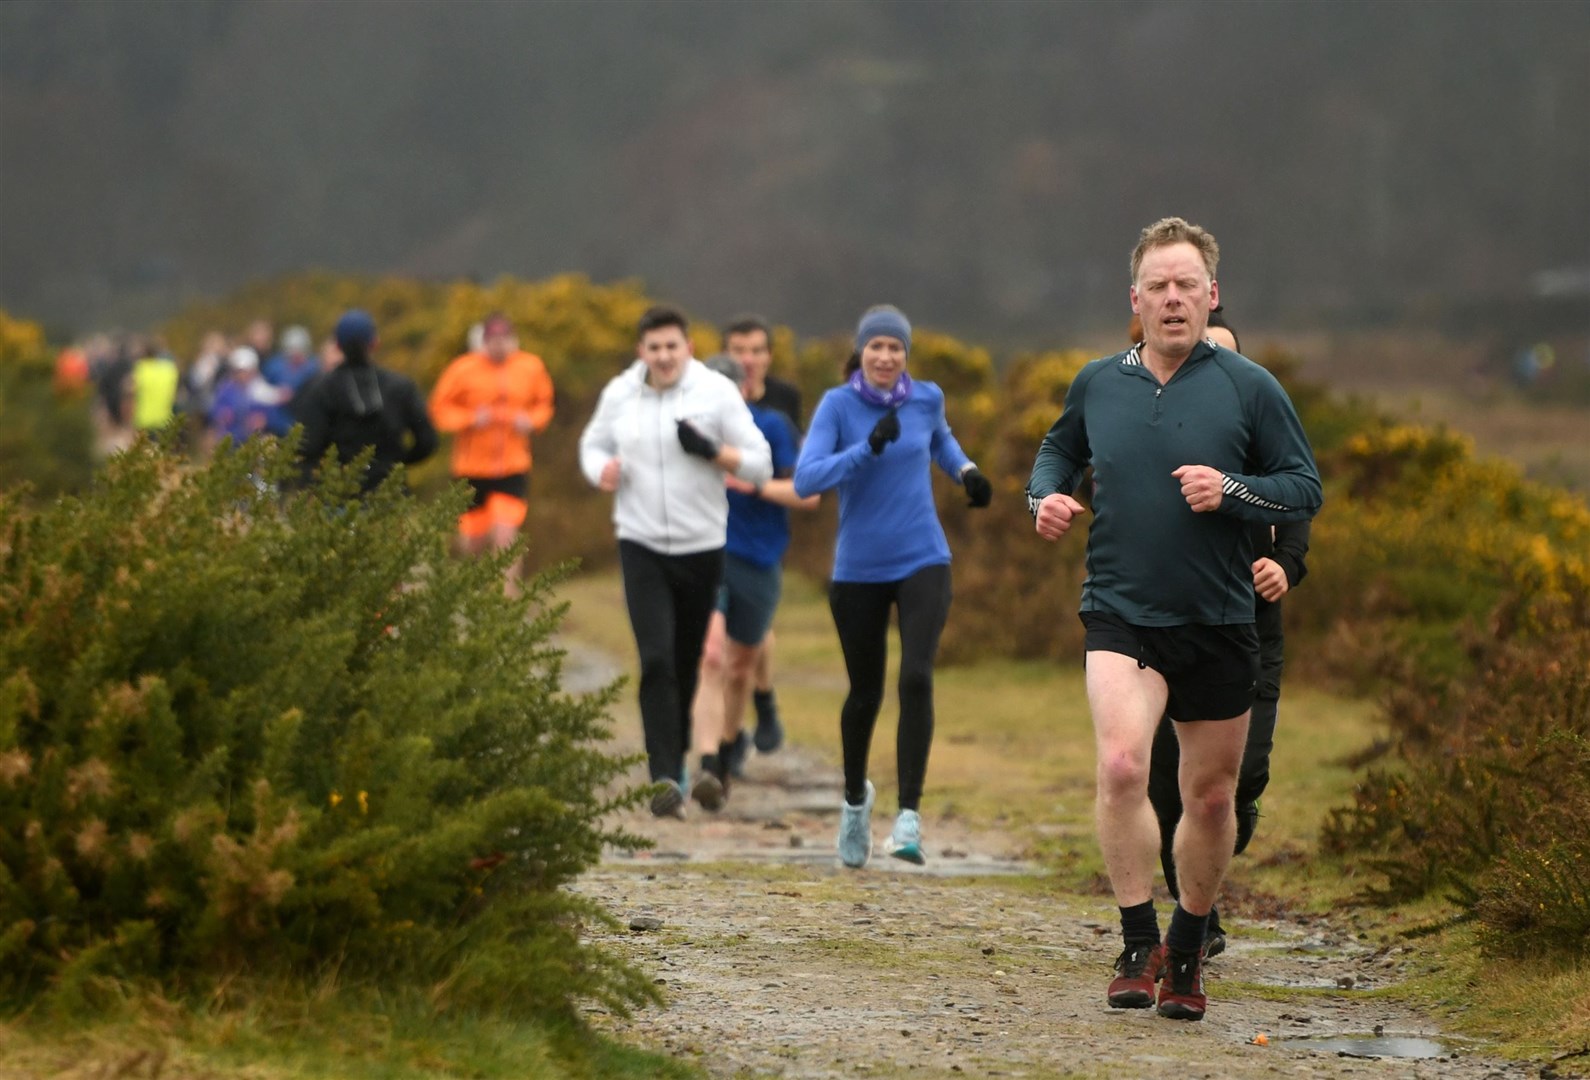 'Catch me if you can!' More than 150 runners turned out for the event. Picture: James Mackenzie